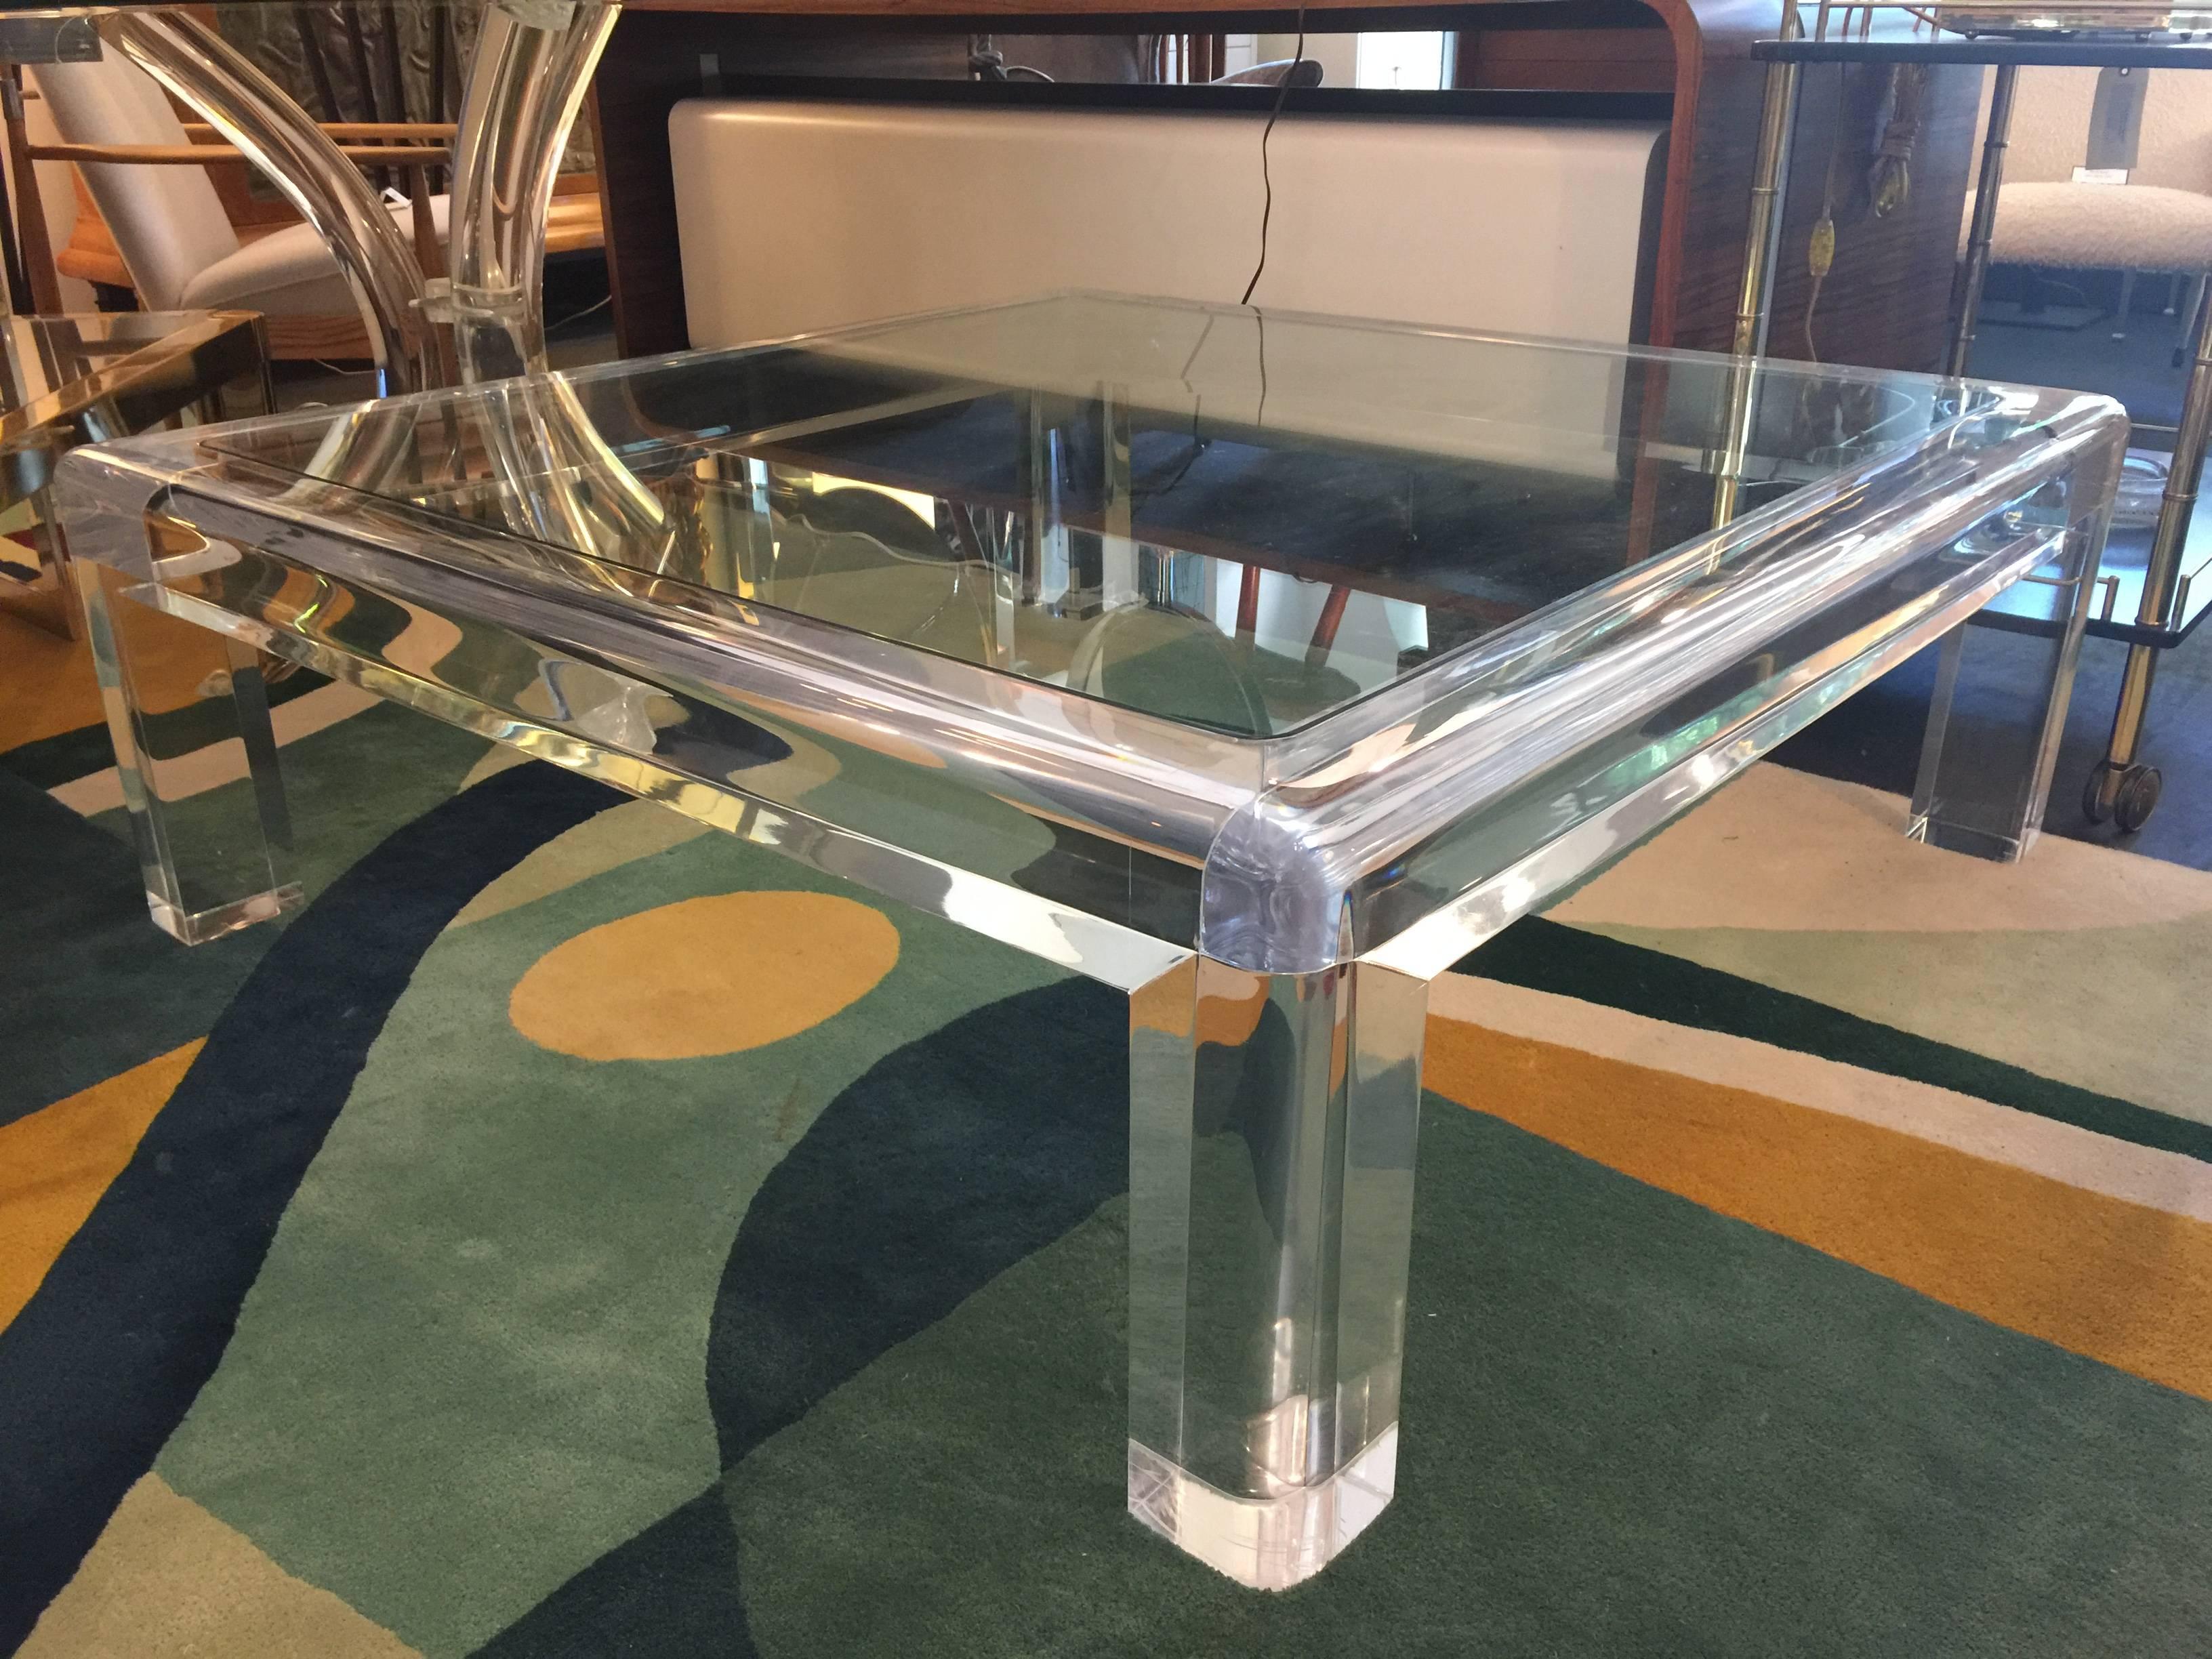 An amazing clear acrylic and glass oversized cocktail table by Les Prismatiques (marked). This significant table is constructed of thick clear acrylic with a 1/2" thick inserted glass top. The frame is 3 1/2 inches of perfectly clear Lucite.